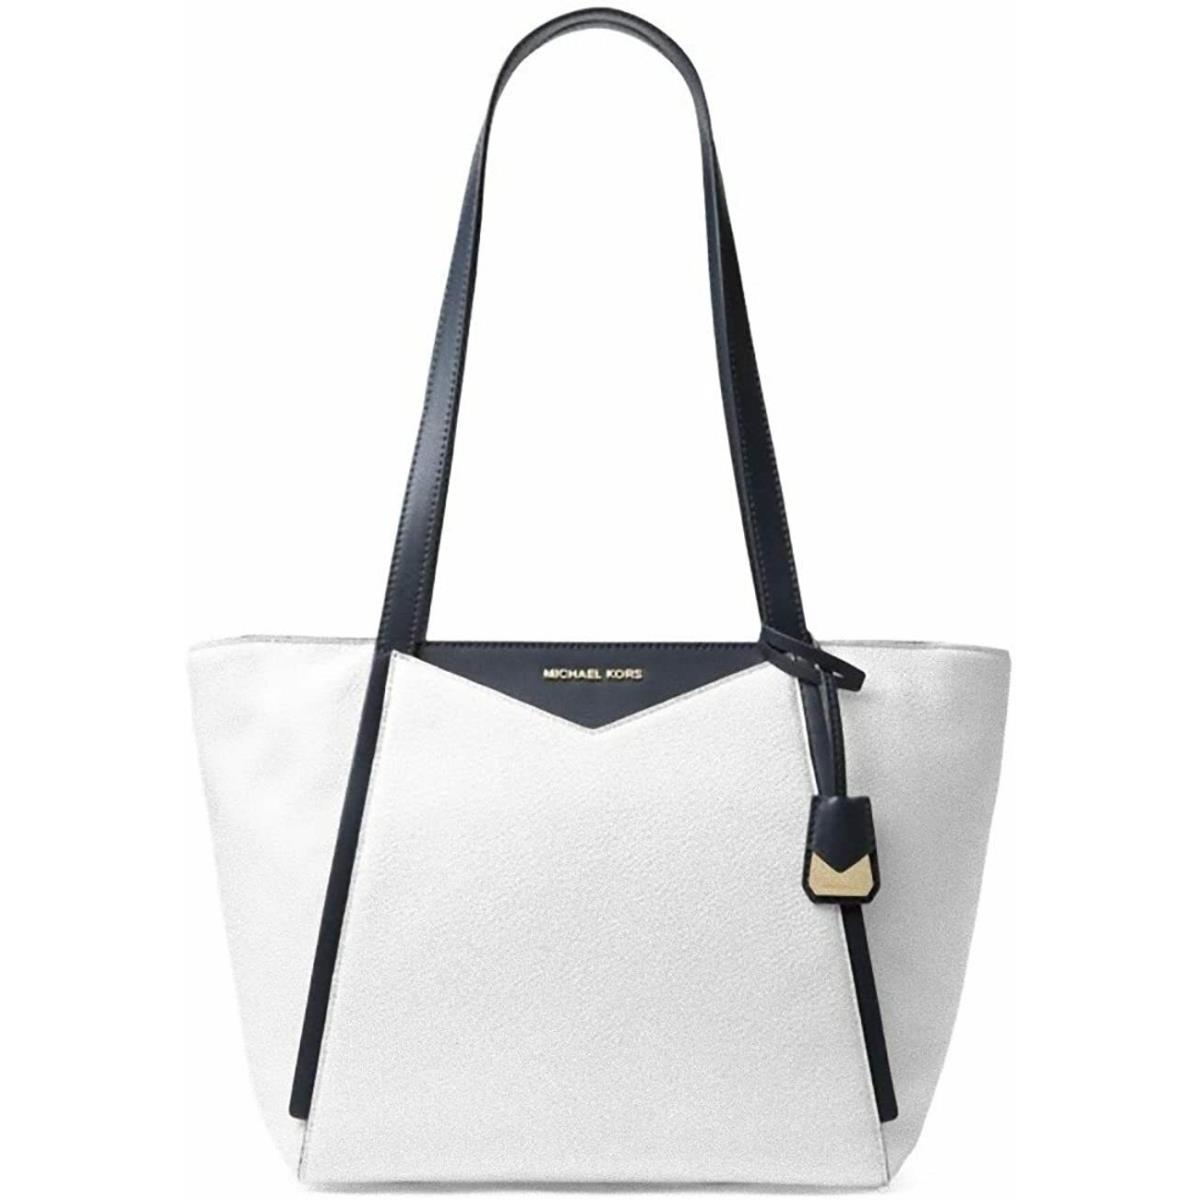 Michael Kors Whitney Small Leather Top Zip Tote Optic White Navy Handbag Bag - Optic white and navy blue admiral Exterior, Optic White Navy Lining, Navy Blue Handle/Strap